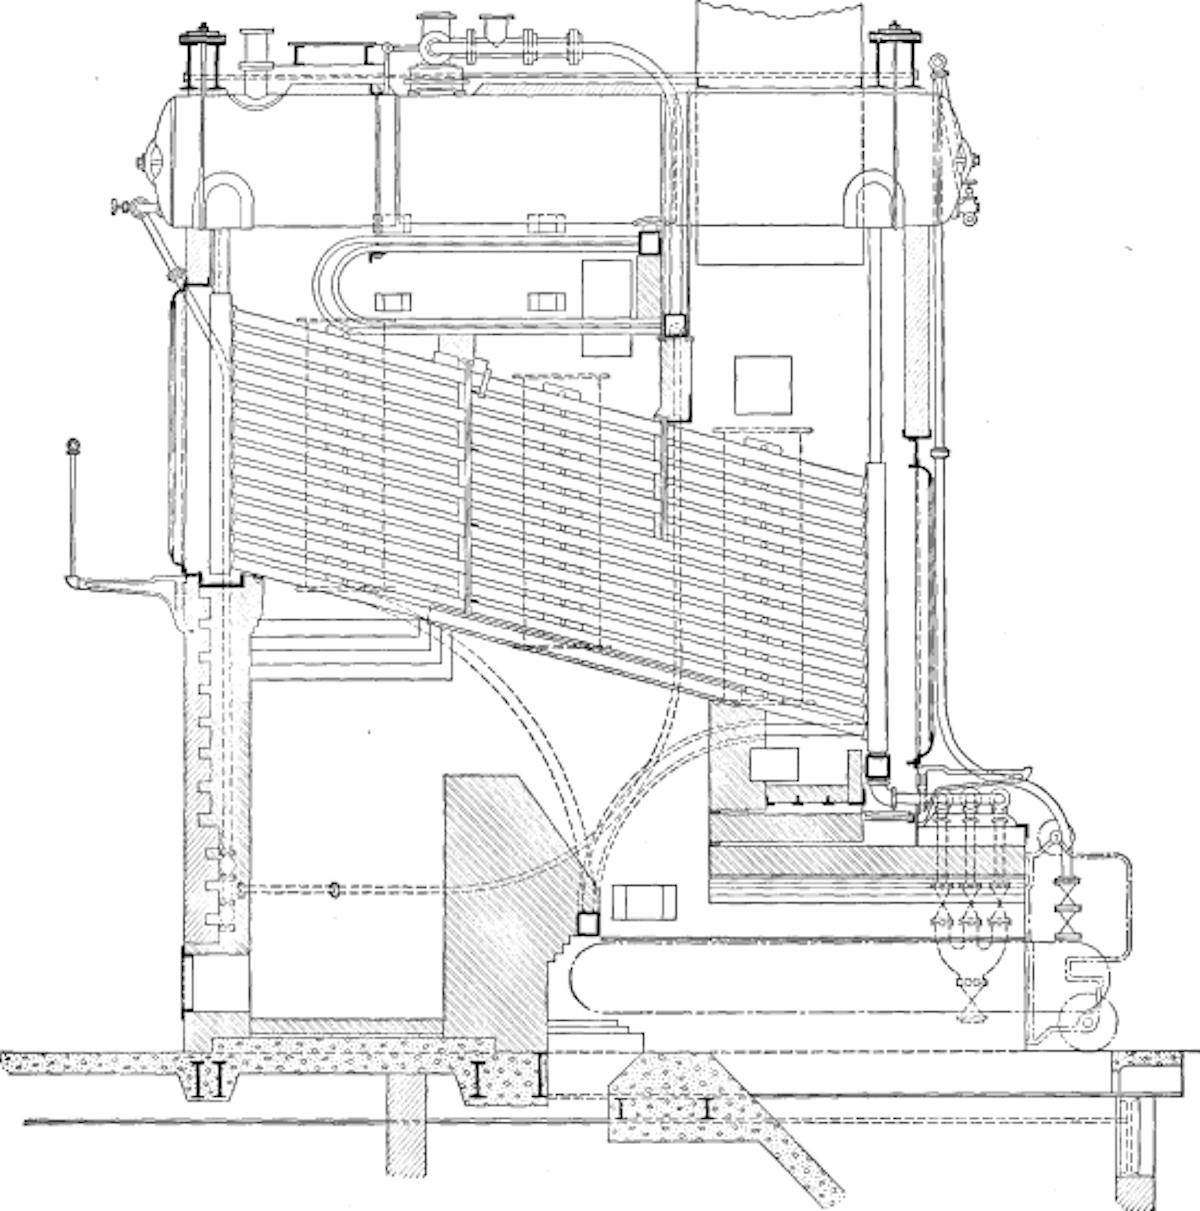 Fig. 26. Babcock & Wilcox Boiler and Superheater Equipped with Babcock & Wilcox Chain Grate Stoker.This Setting has been Particularly Successful in Minimizing Smoke